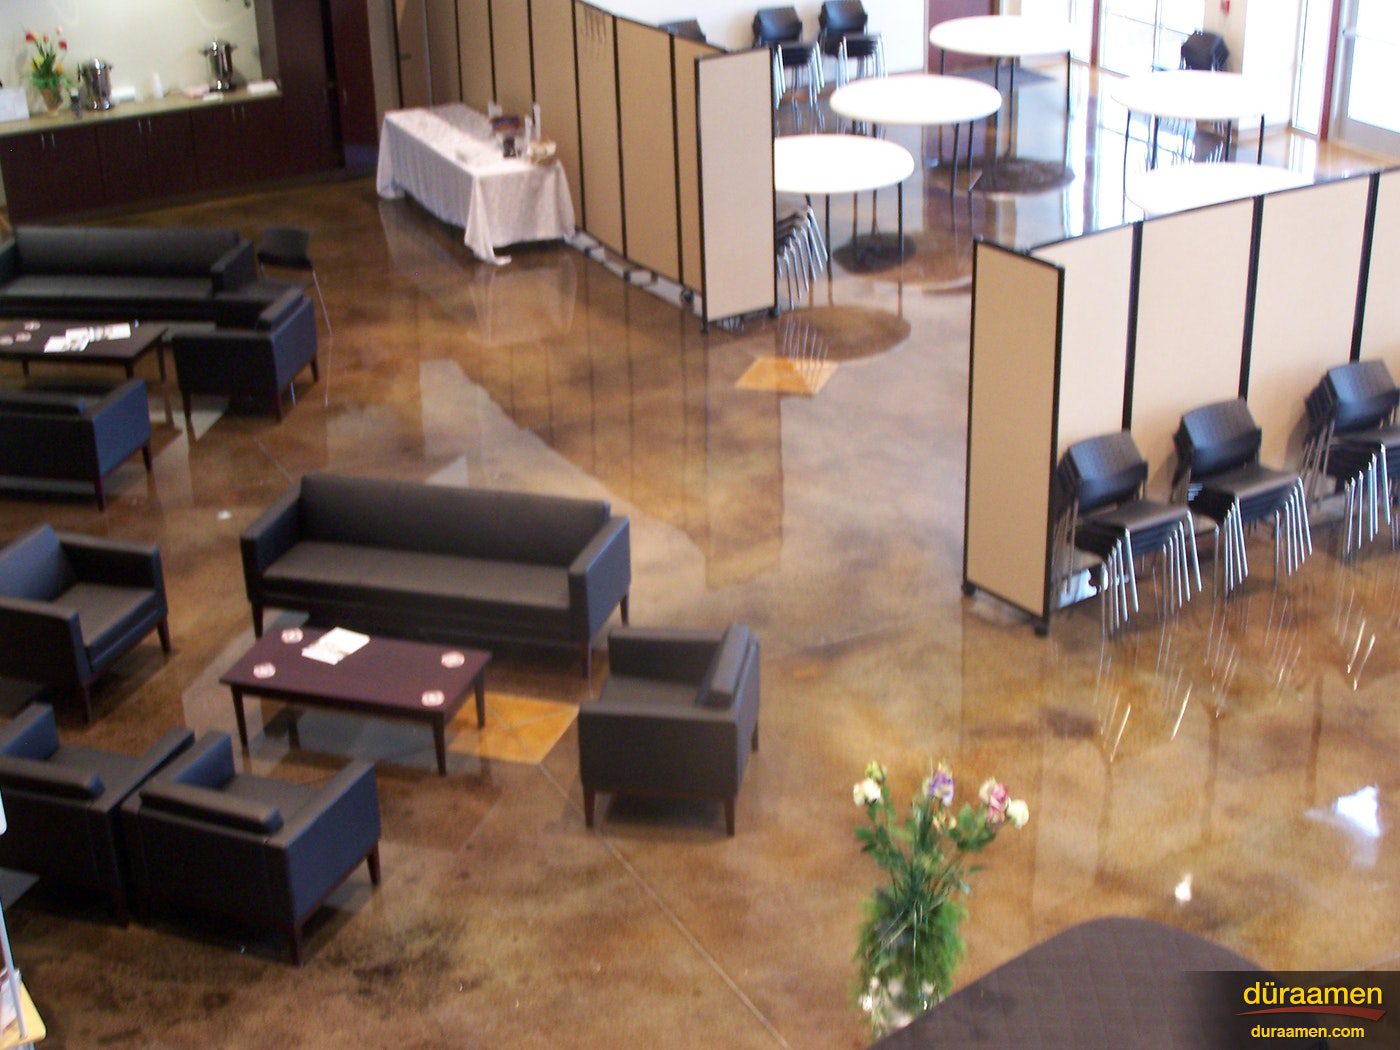 High shine dyed concrete in the church banquet center as shown from abovenbspPolished Stained Concrete Floors in a Church in Tulsa OK | Duraamen Engineered Products Inc